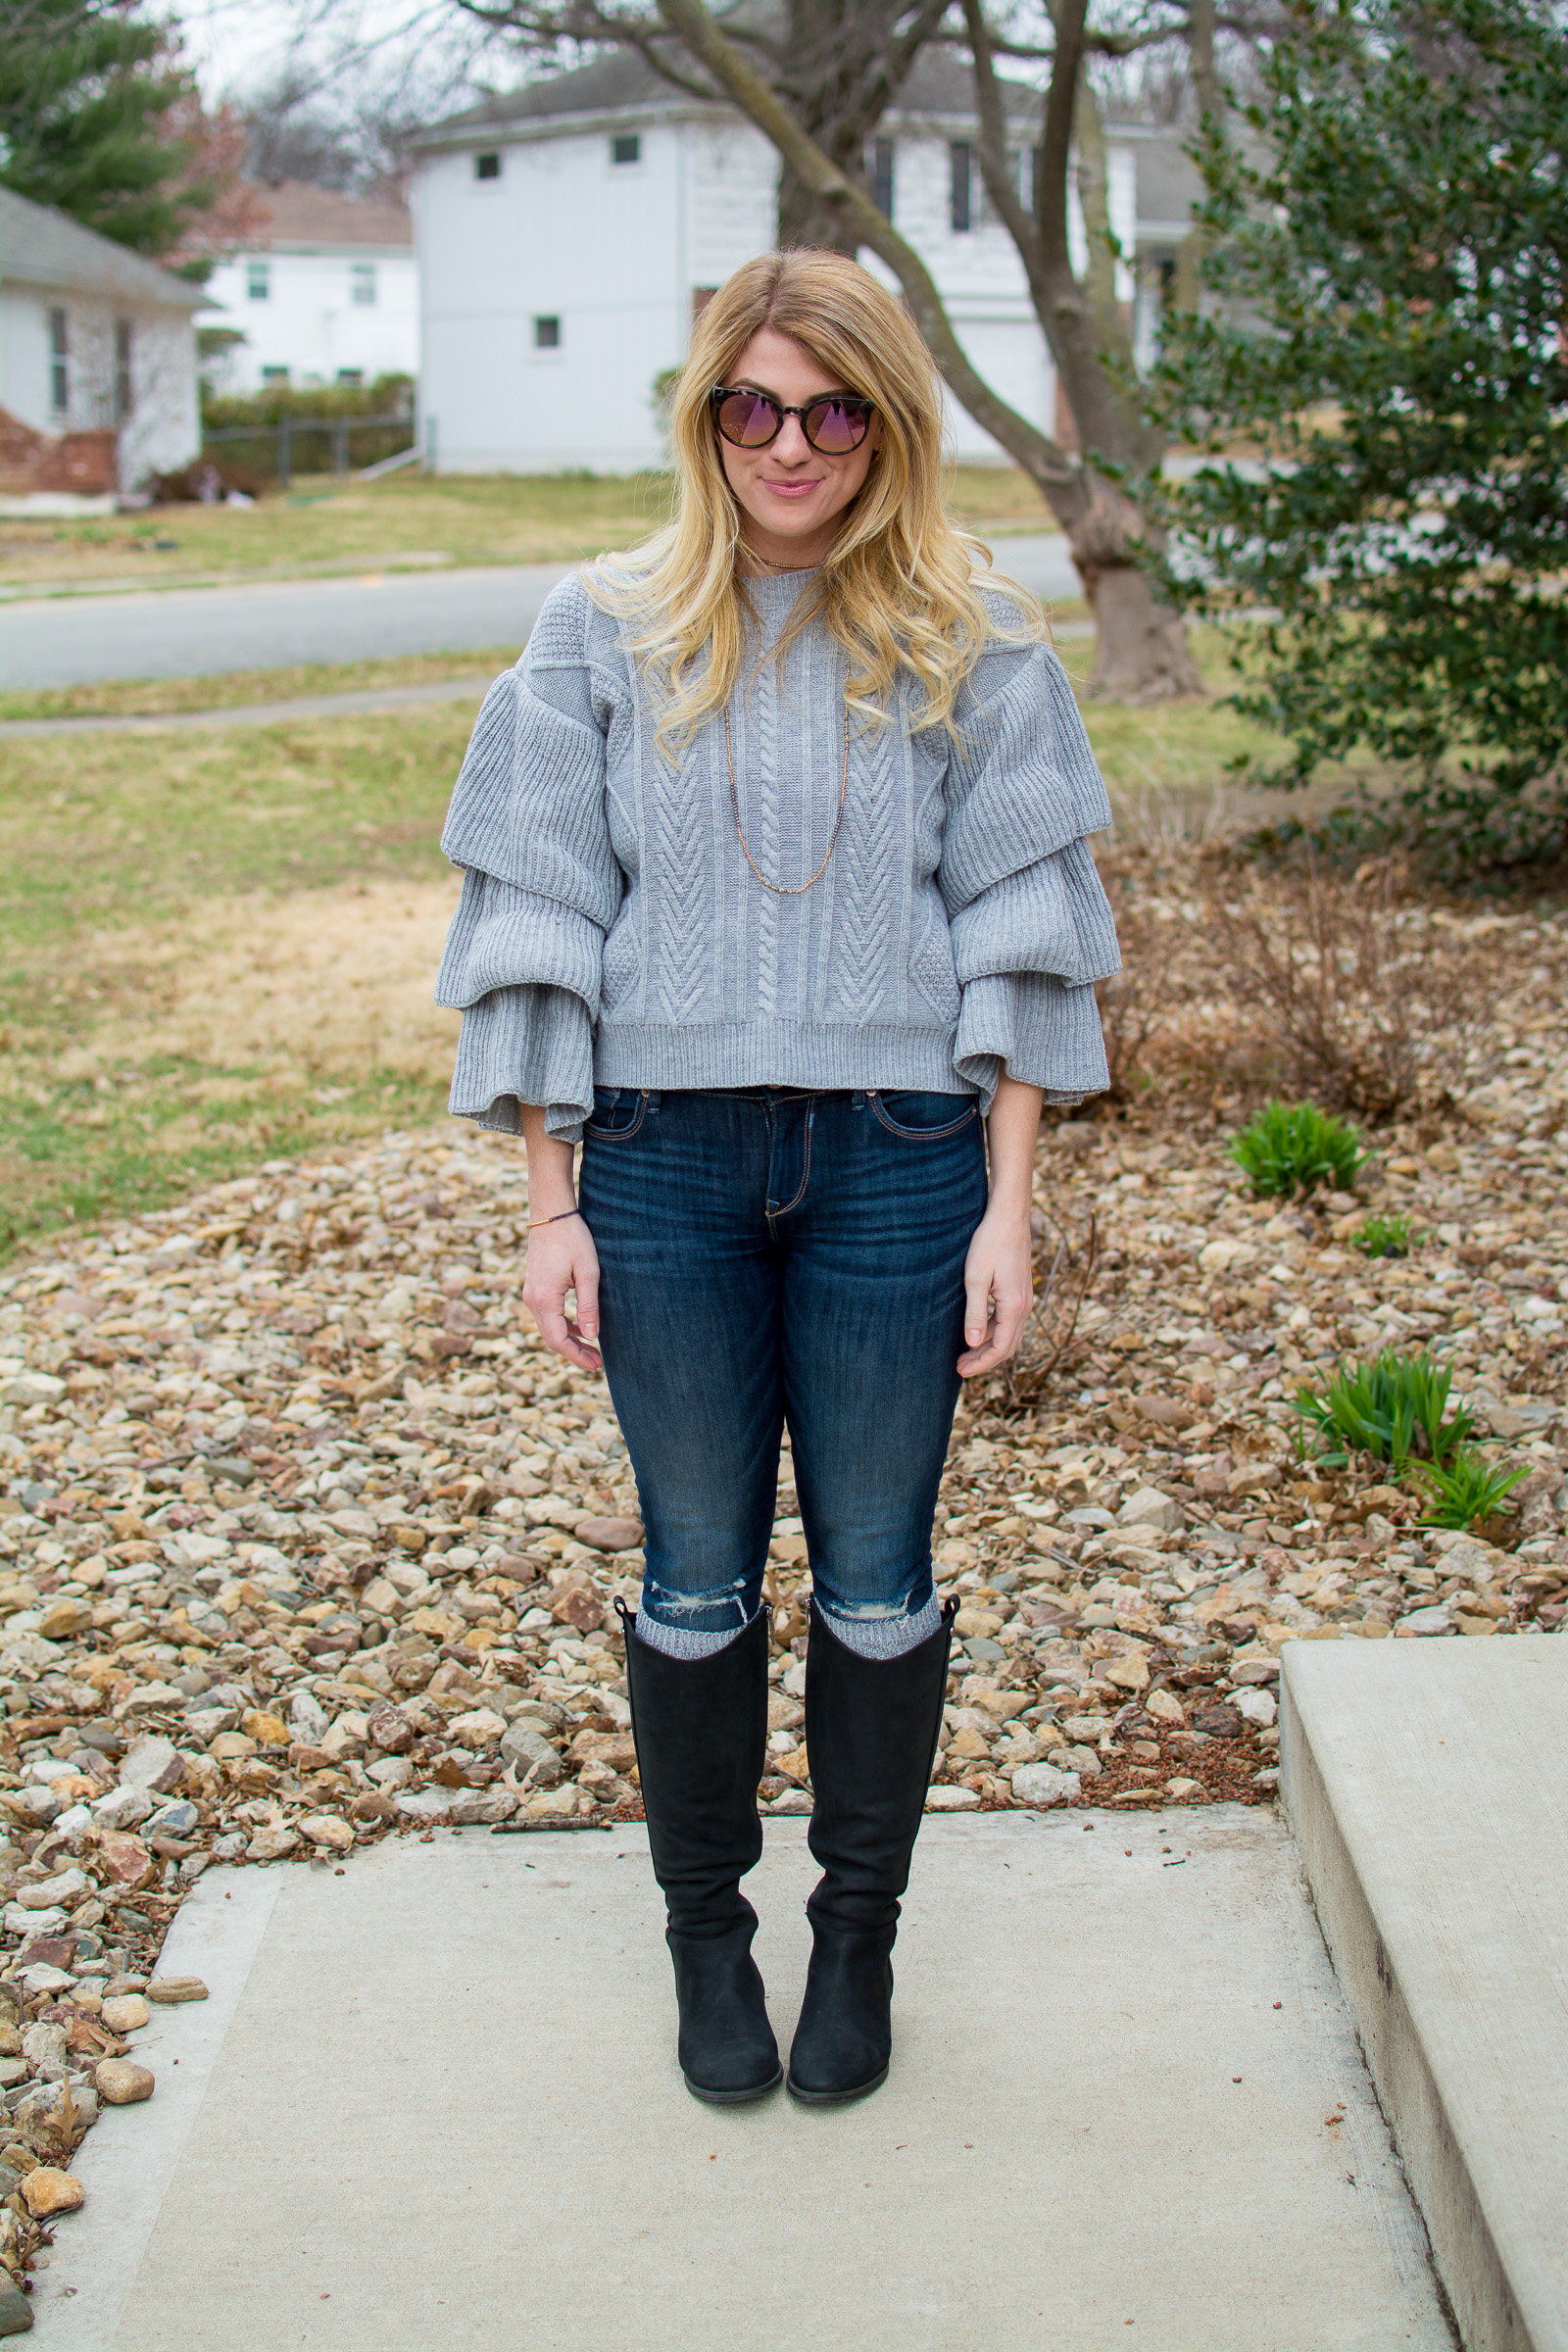 Super Ruffled Sweater + Riding Boots. | Le Stylo Rouge